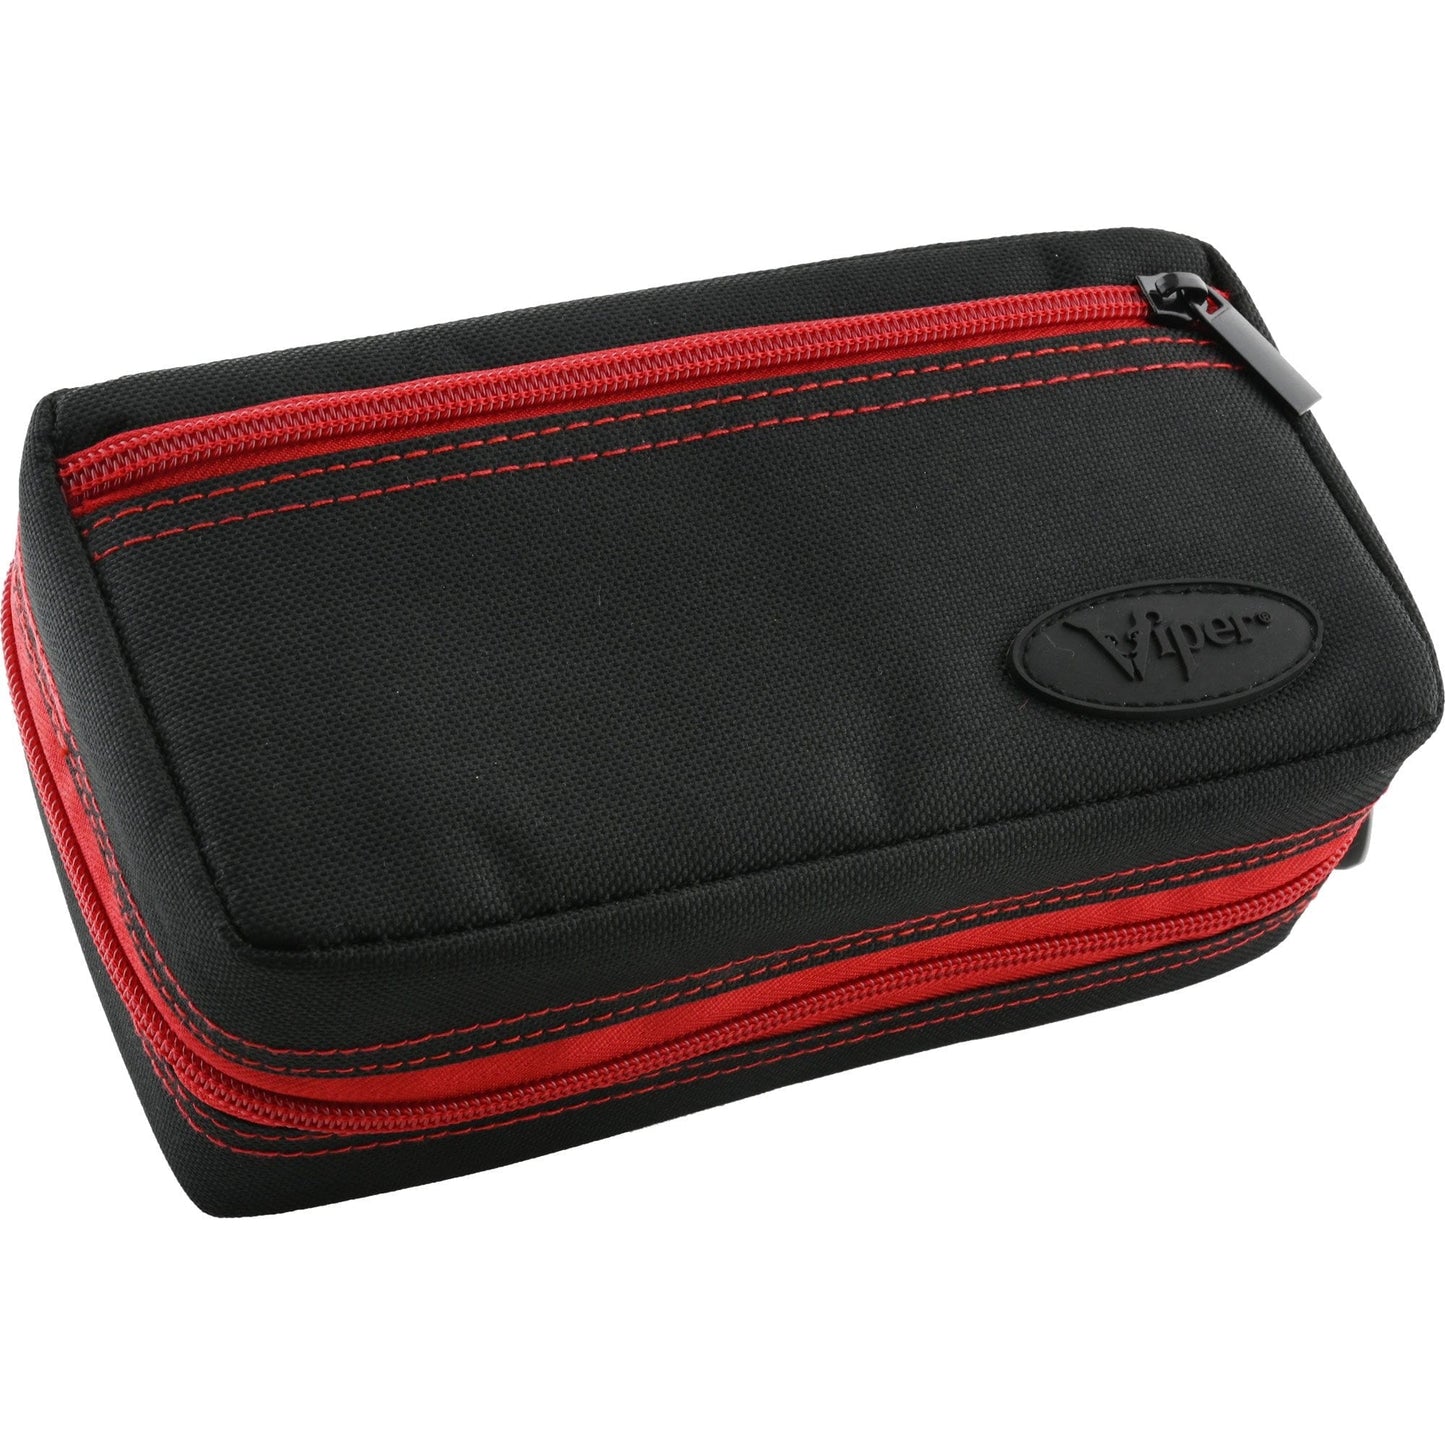 Viper Plazma Pro Dart Case - Extremely Tough & Durable Red